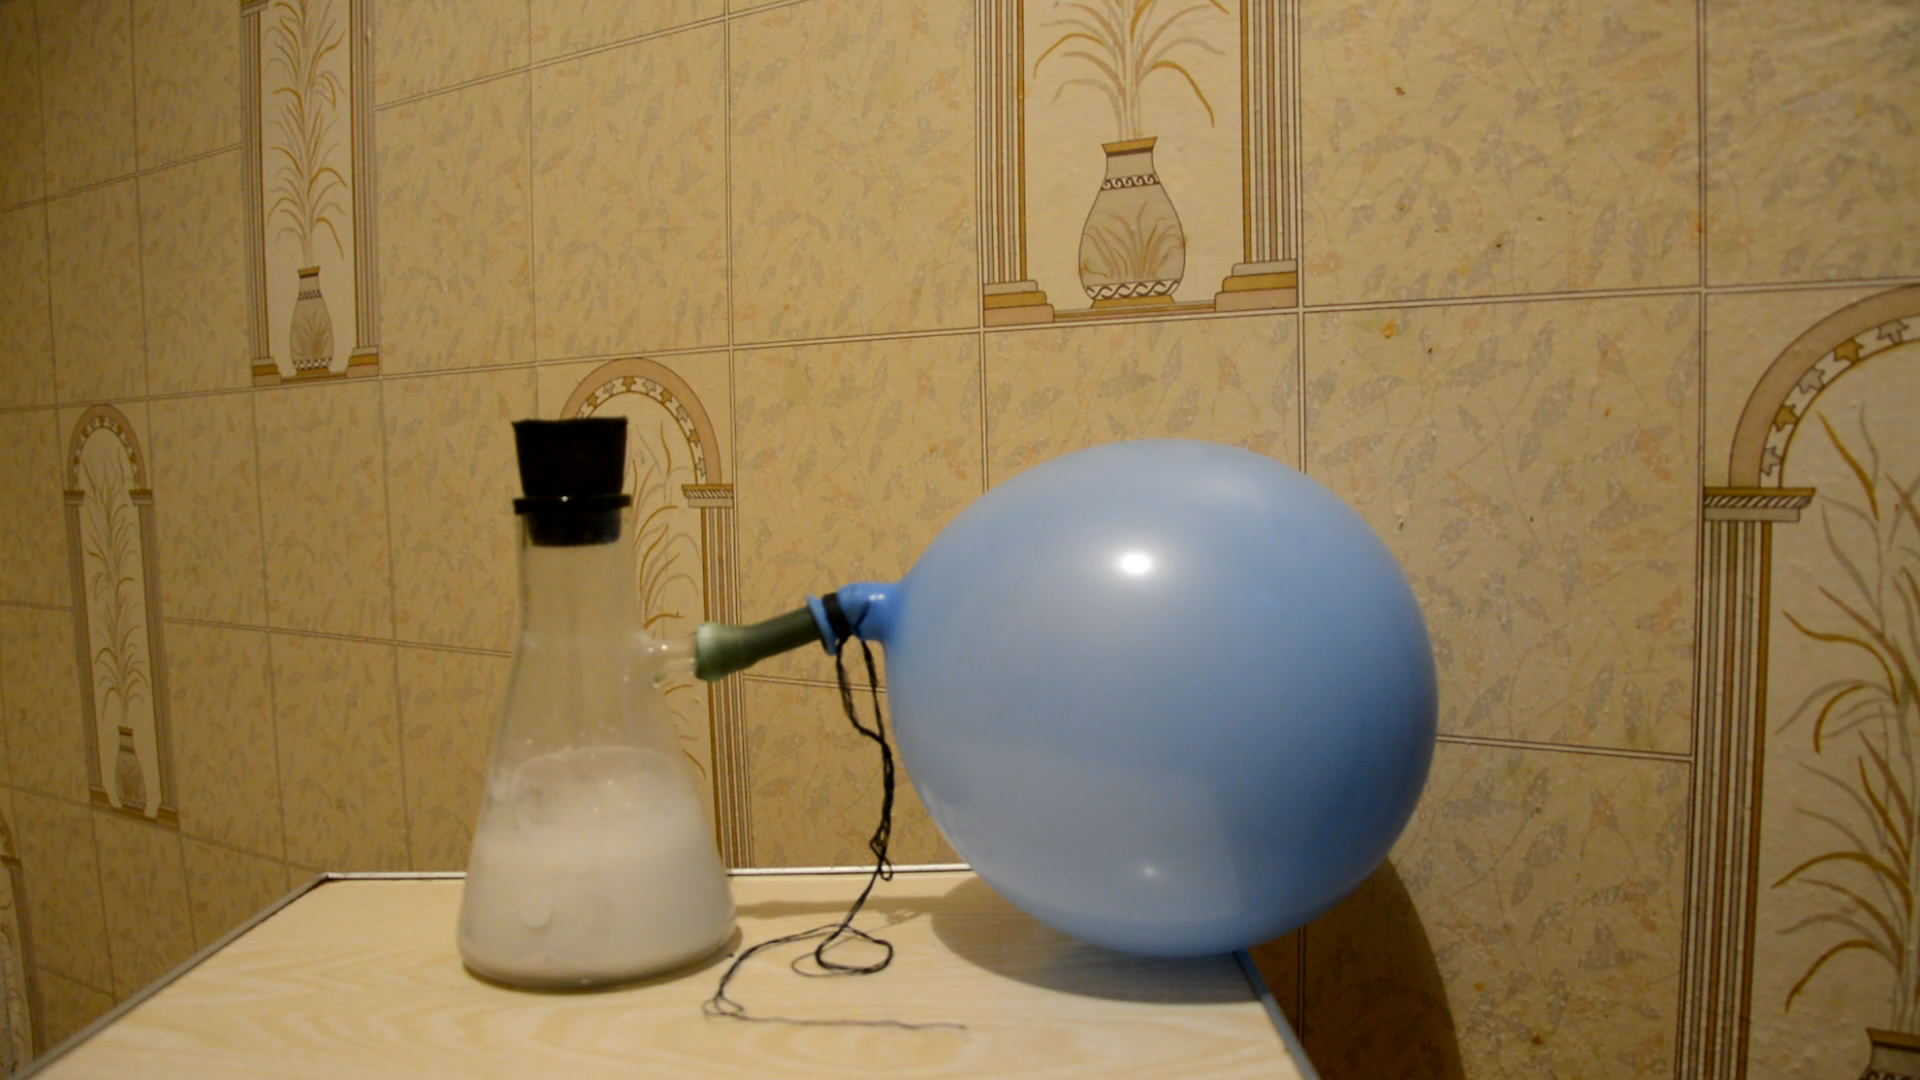  - (  ). Mixture of Acetylene and Air (Explosion of Toy Balloon)